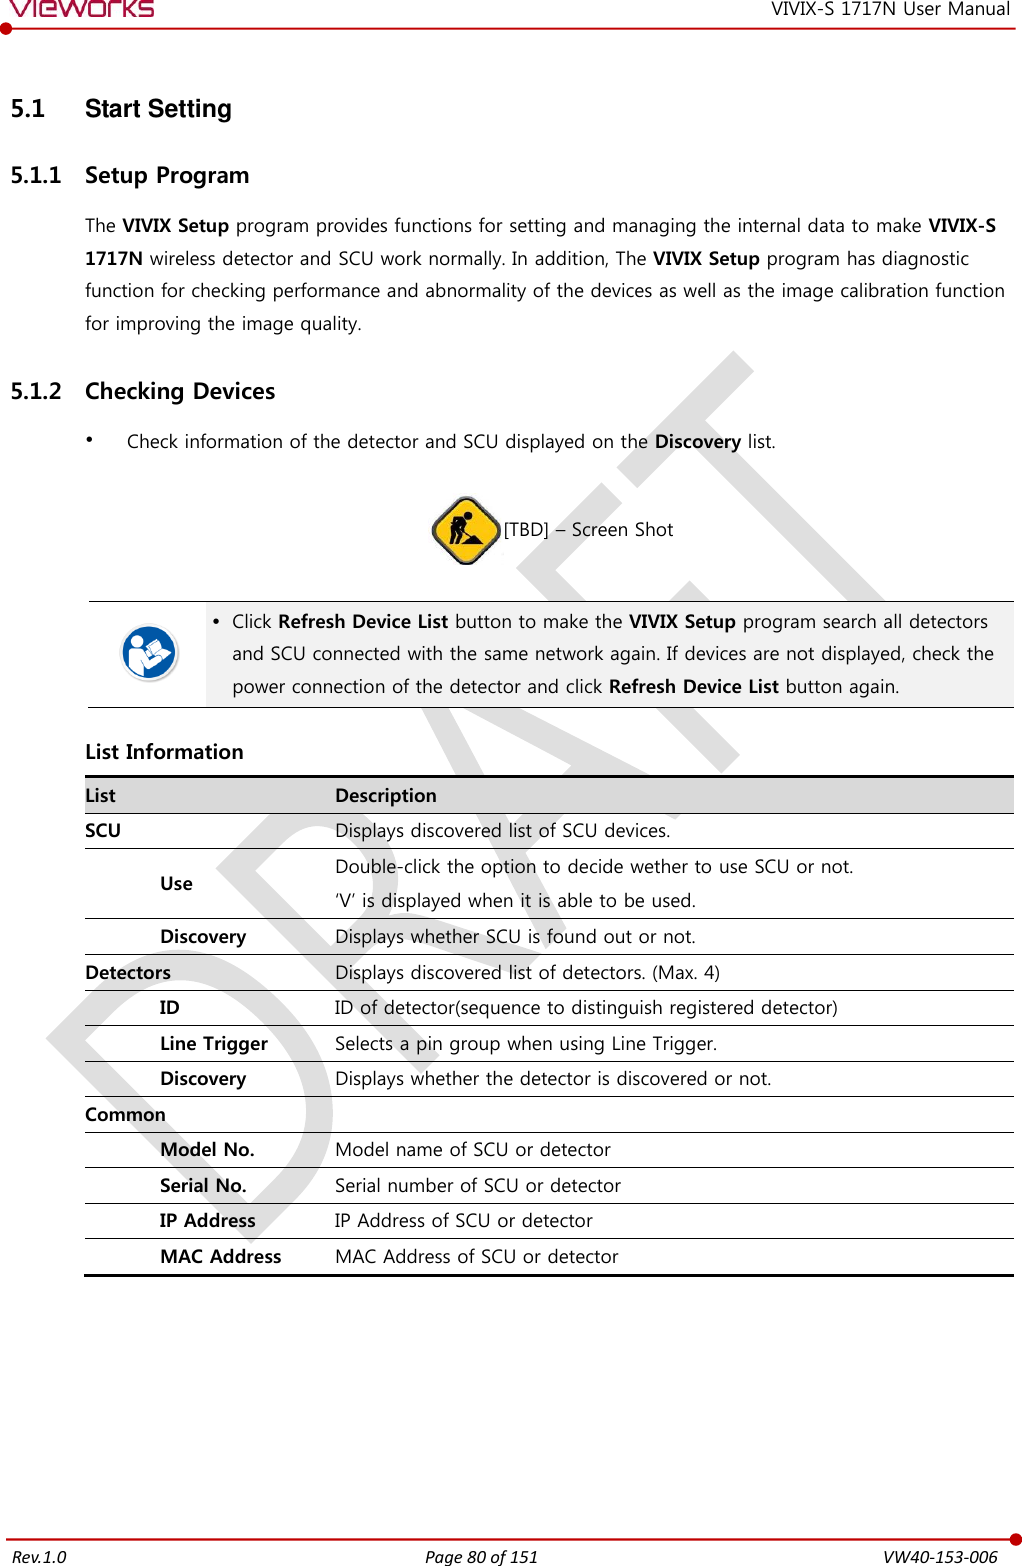   Rev.1.0 Page 80 of 151  VW40-153-006 VIVIX-S 1717N User Manual 5.1  Start Setting 5.1.1 Setup Program The VIVIX Setup program provides functions for setting and managing the internal data to make VIVIX-S 1717N wireless detector and SCU work normally. In addition, The VIVIX Setup program has diagnostic function for checking performance and abnormality of the devices as well as the image calibration function for improving the image quality. 5.1.2 Checking Devices  Check information of the detector and SCU displayed on the Discovery list.  [TBD] – Screen Shot    Click Refresh Device List button to make the VIVIX Setup program search all detectors and SCU connected with the same network again. If devices are not displayed, check the power connection of the detector and click Refresh Device List button again.  List Information List Description SCU Displays discovered list of SCU devices. Use Double-click the option to decide wether to use SCU or not. ‘V’ is displayed when it is able to be used. Discovery Displays whether SCU is found out or not. Detectors Displays discovered list of detectors. (Max. 4) ID ID of detector(sequence to distinguish registered detector) Line Trigger Selects a pin group when using Line Trigger. Discovery Displays whether the detector is discovered or not. Common  Model No. Model name of SCU or detector Serial No. Serial number of SCU or detector IP Address IP Address of SCU or detector MAC Address MAC Address of SCU or detector  